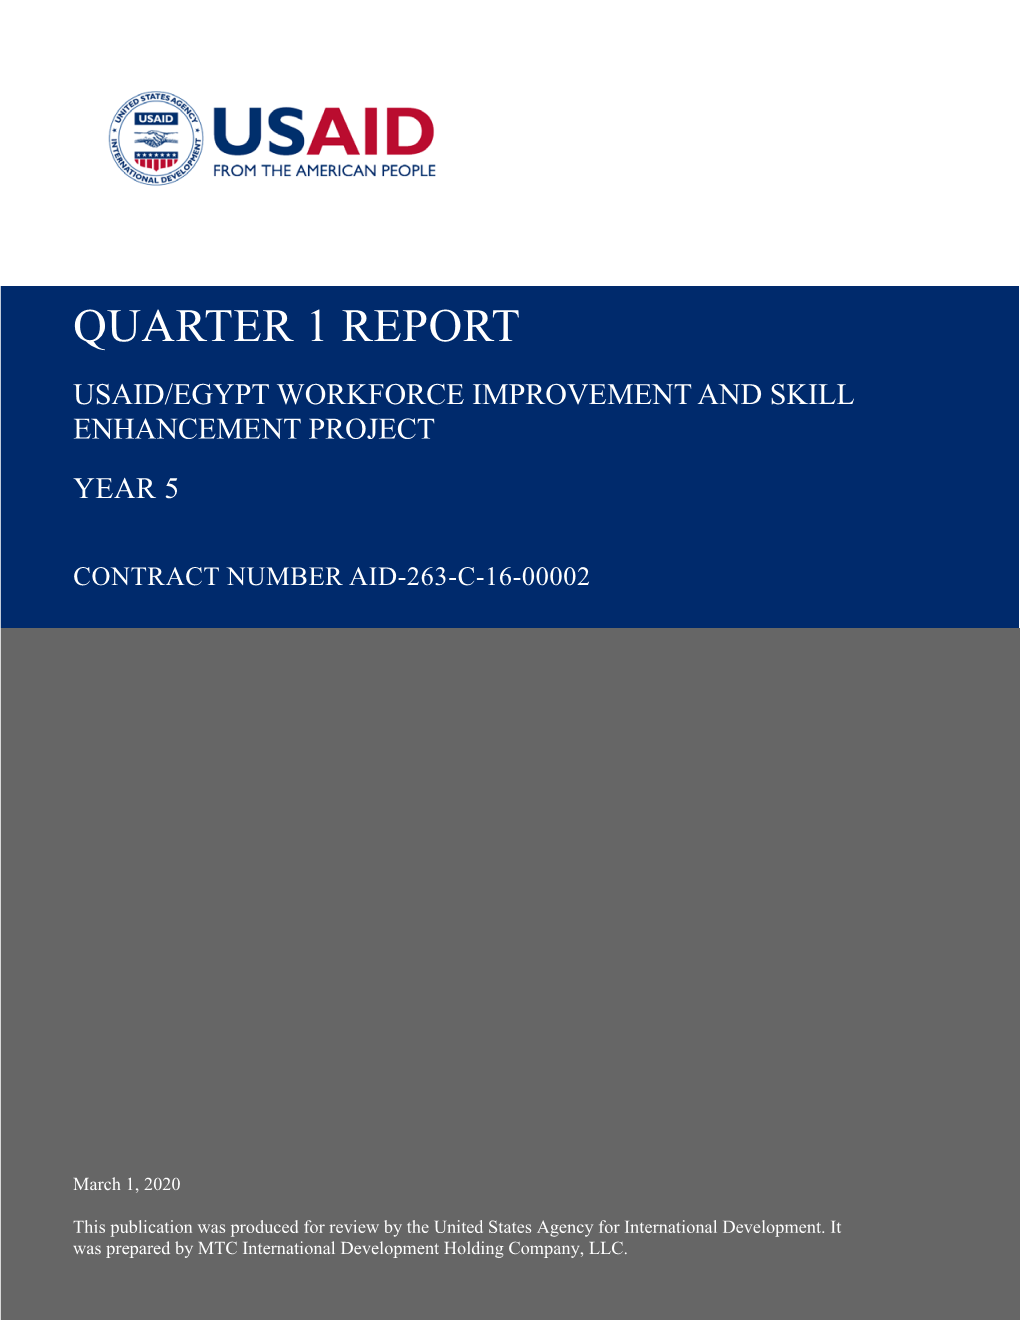 Quarter 1 Report: USAID/Egypt Workforce Improvement and Skill